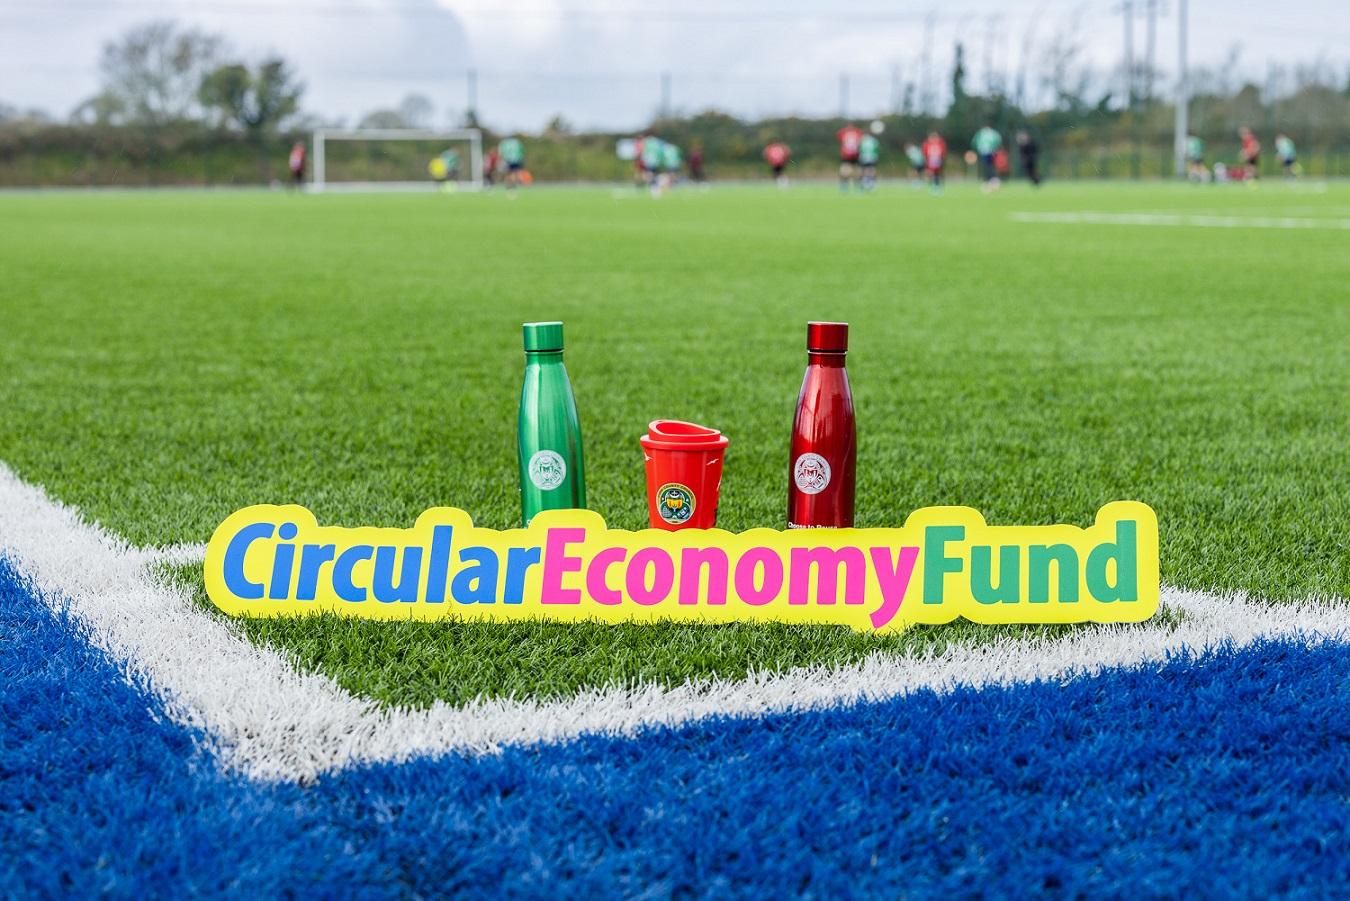 A green reusable metal water bottle, a red reusable metal water bottle and a red resuable coffee mug all with the Cork County logo placed on a sports pitch with the 'Circular Economy Fund' logo placed in front of them.